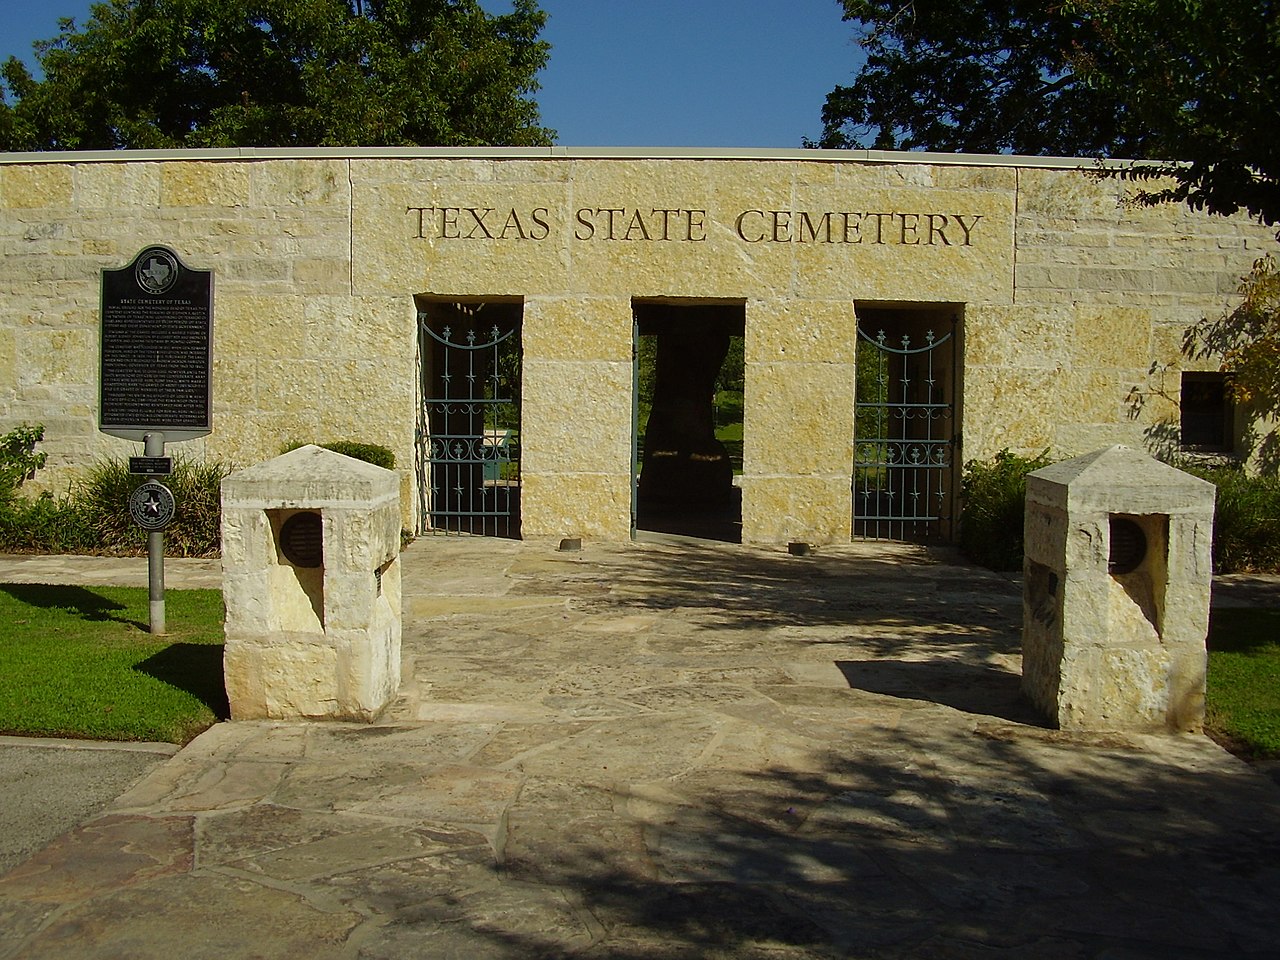 The imposing granite entrance to the Texas State Historical Society, with three entrances in the stone wall which can be gated off.